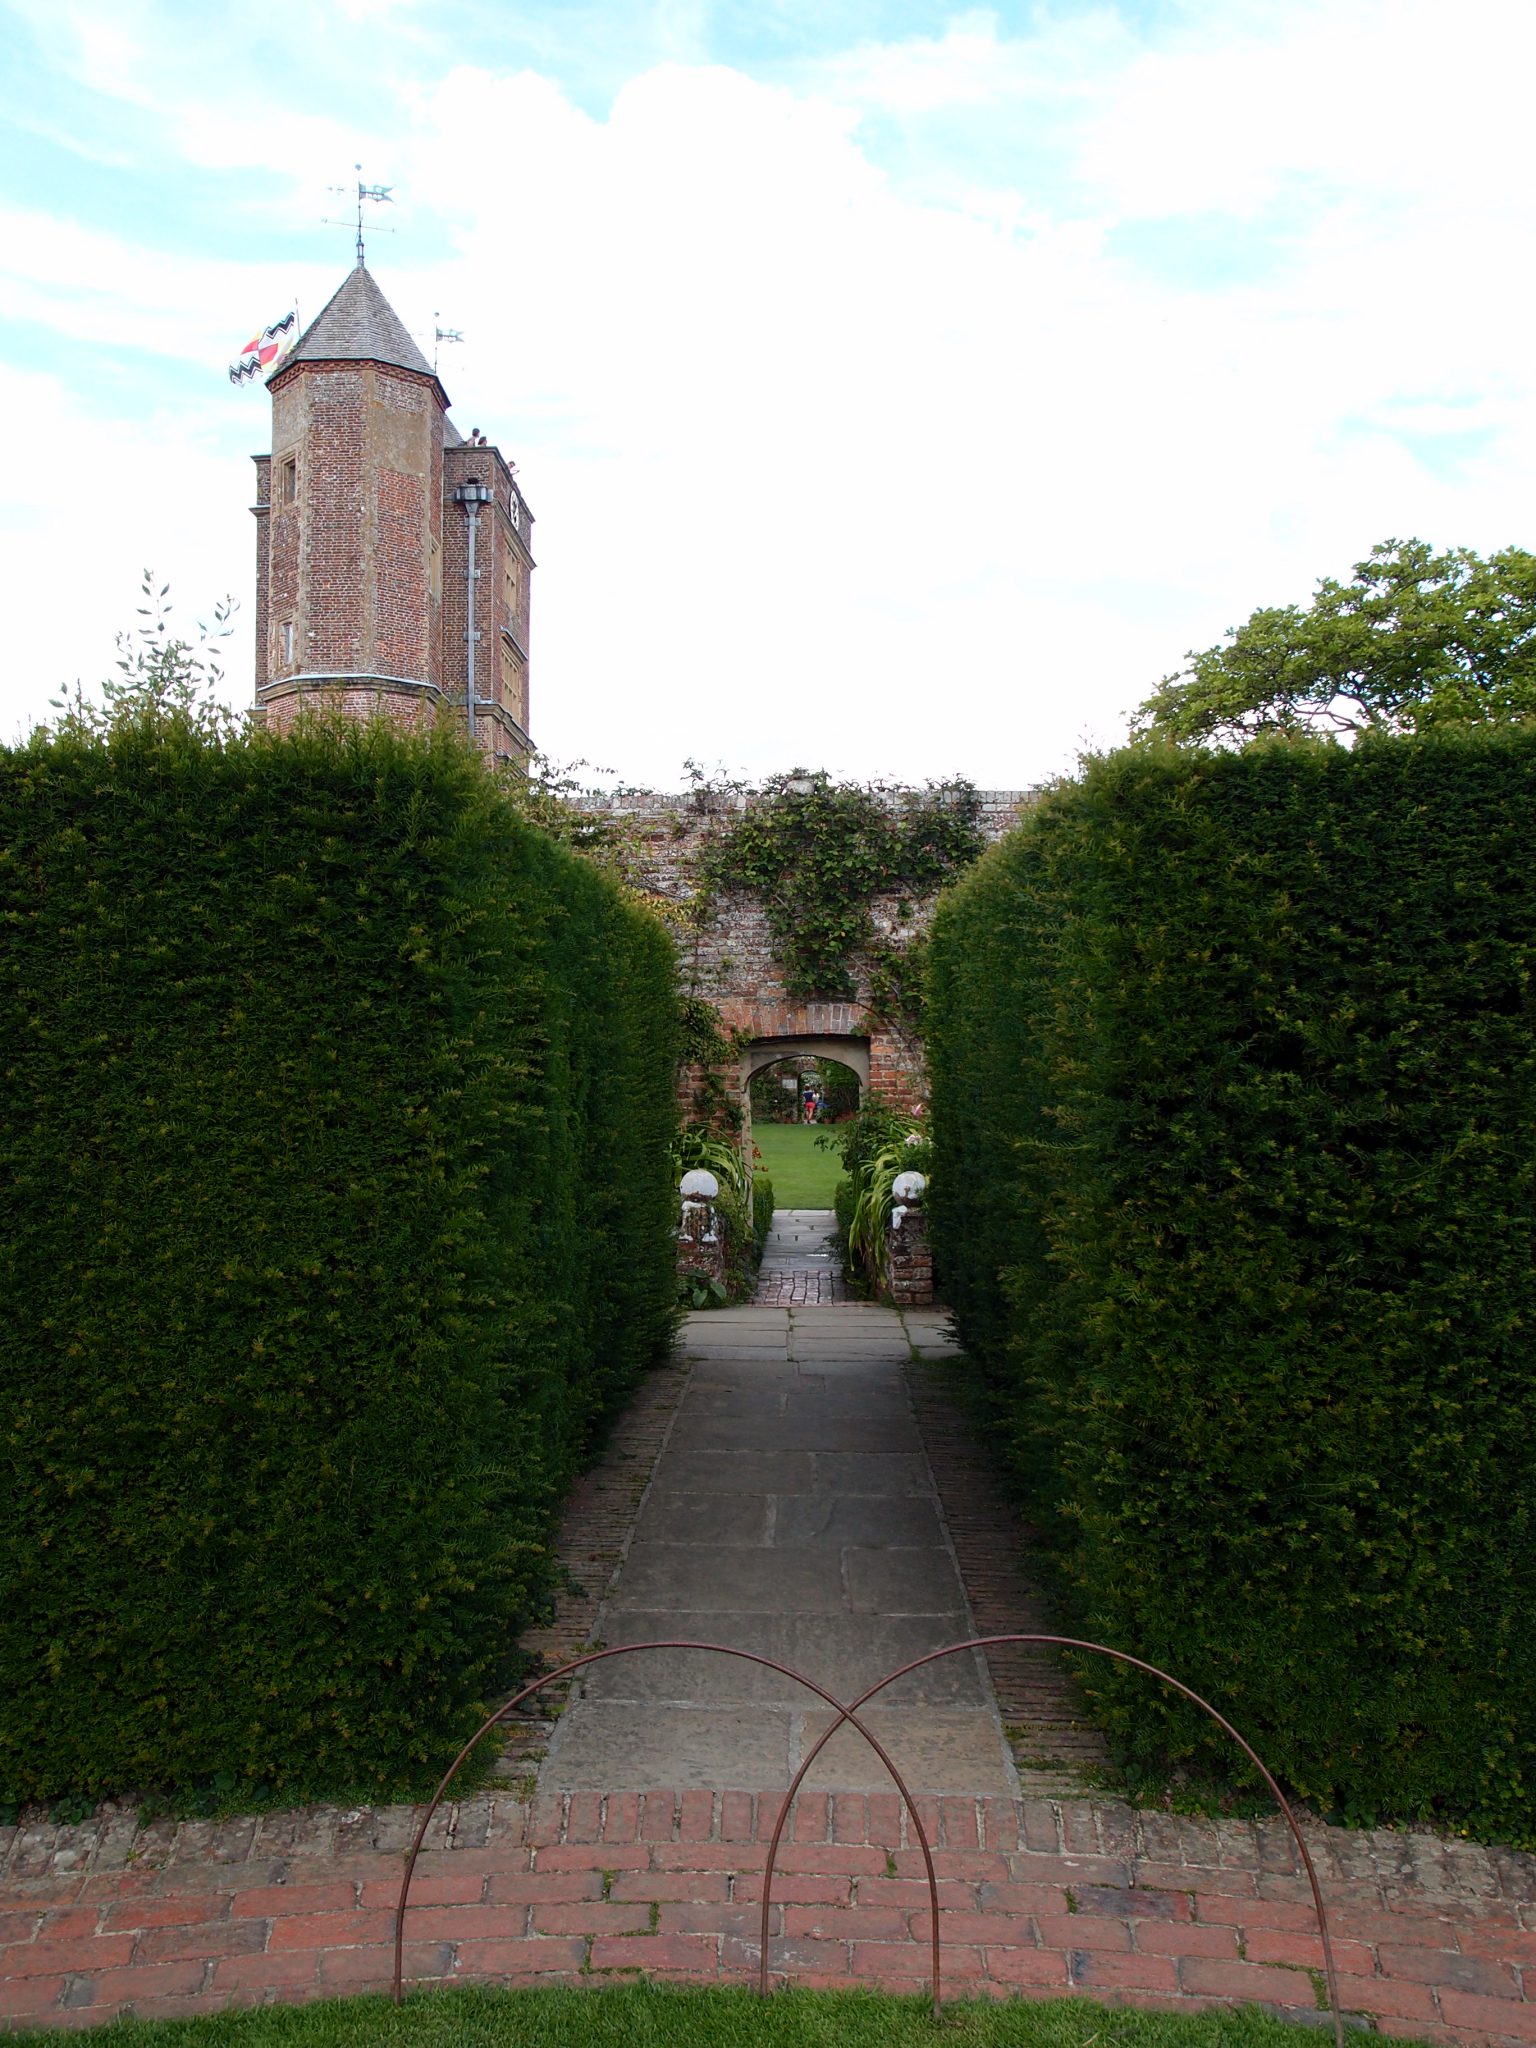 View from the Rose Garden, toward the Tower Lawn